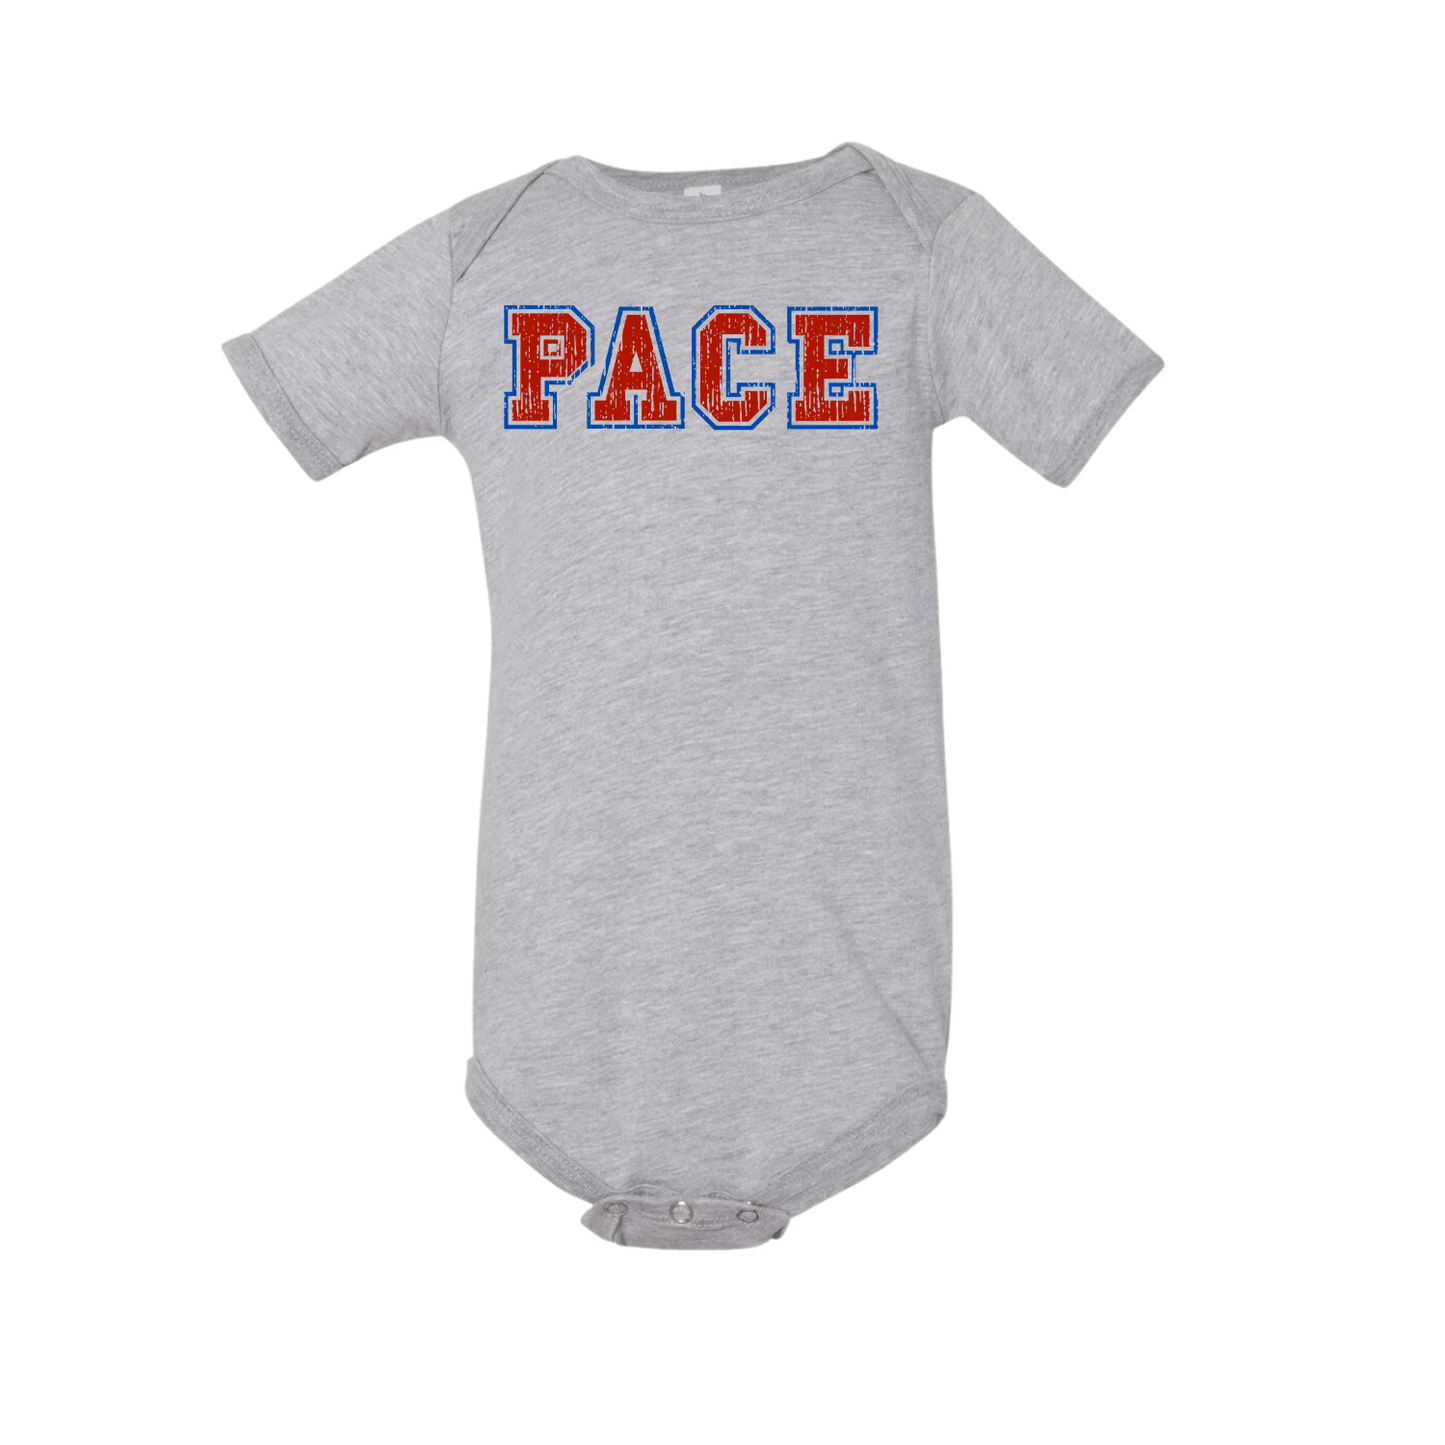 Pace Distressed Tee Infant